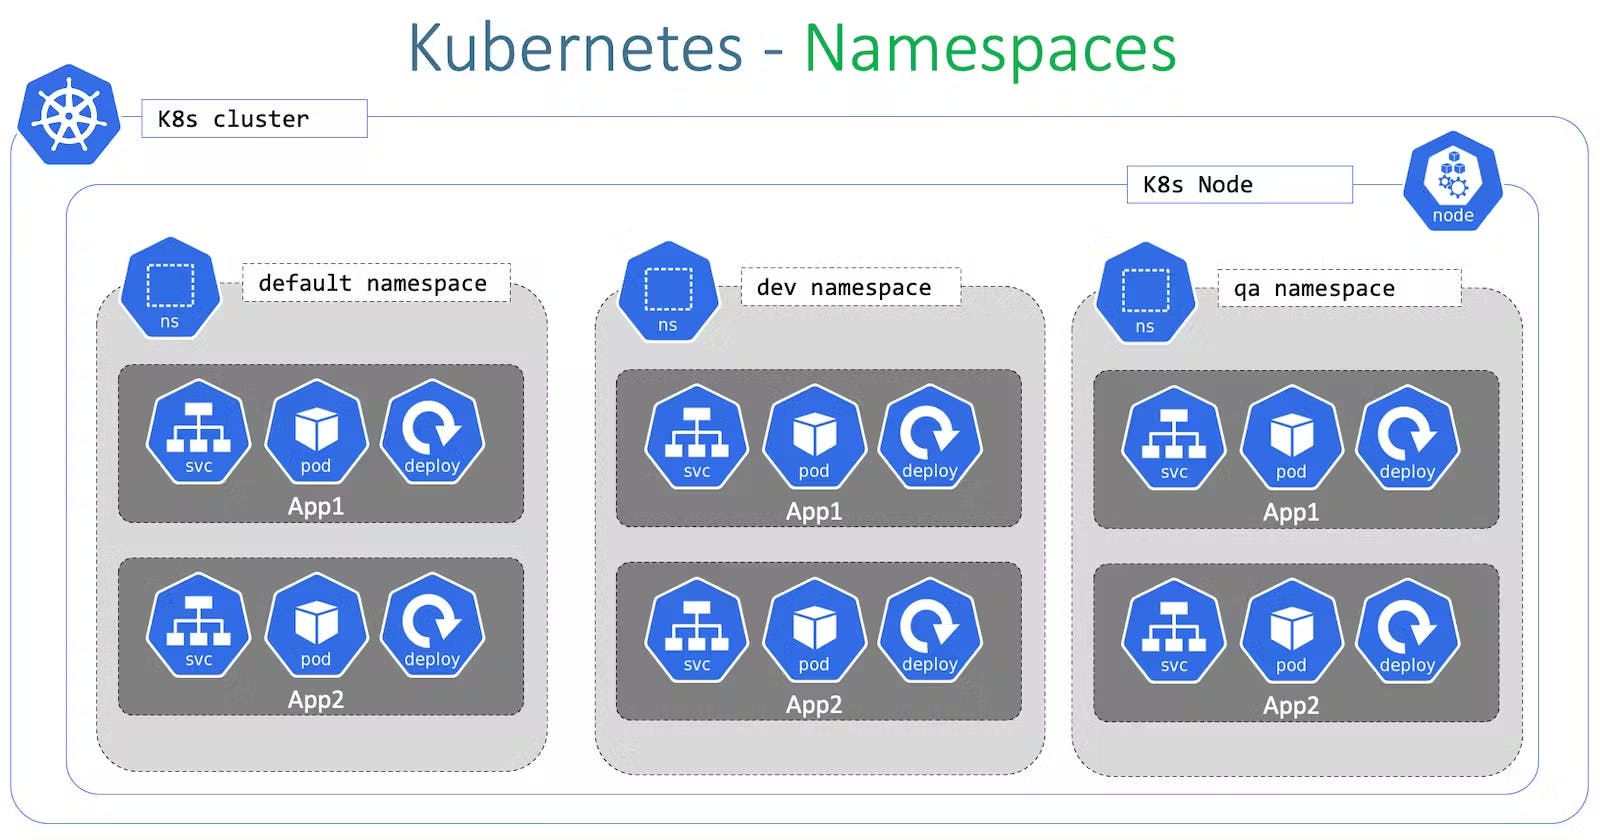 Managing Deployments and Networking in Kubernetes